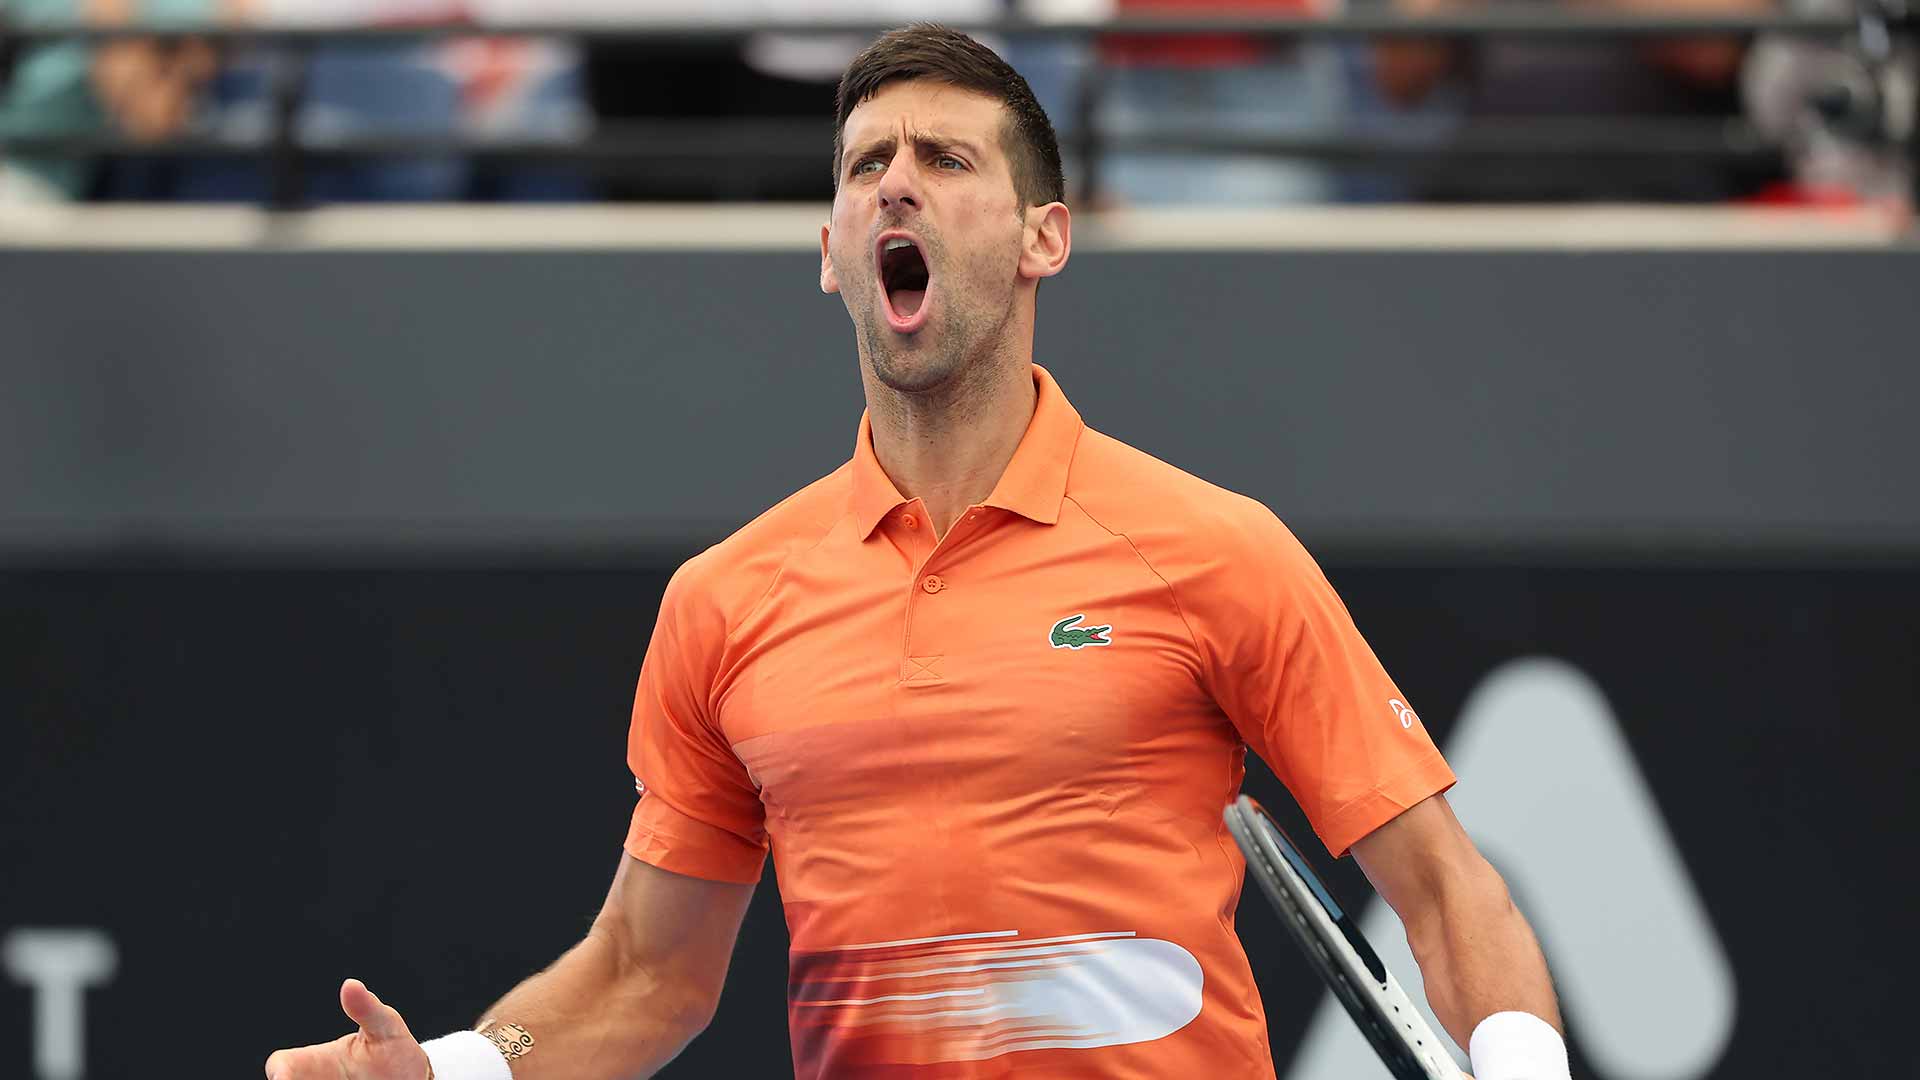 Djokovic and Sabalenka are the champs in Adelaide